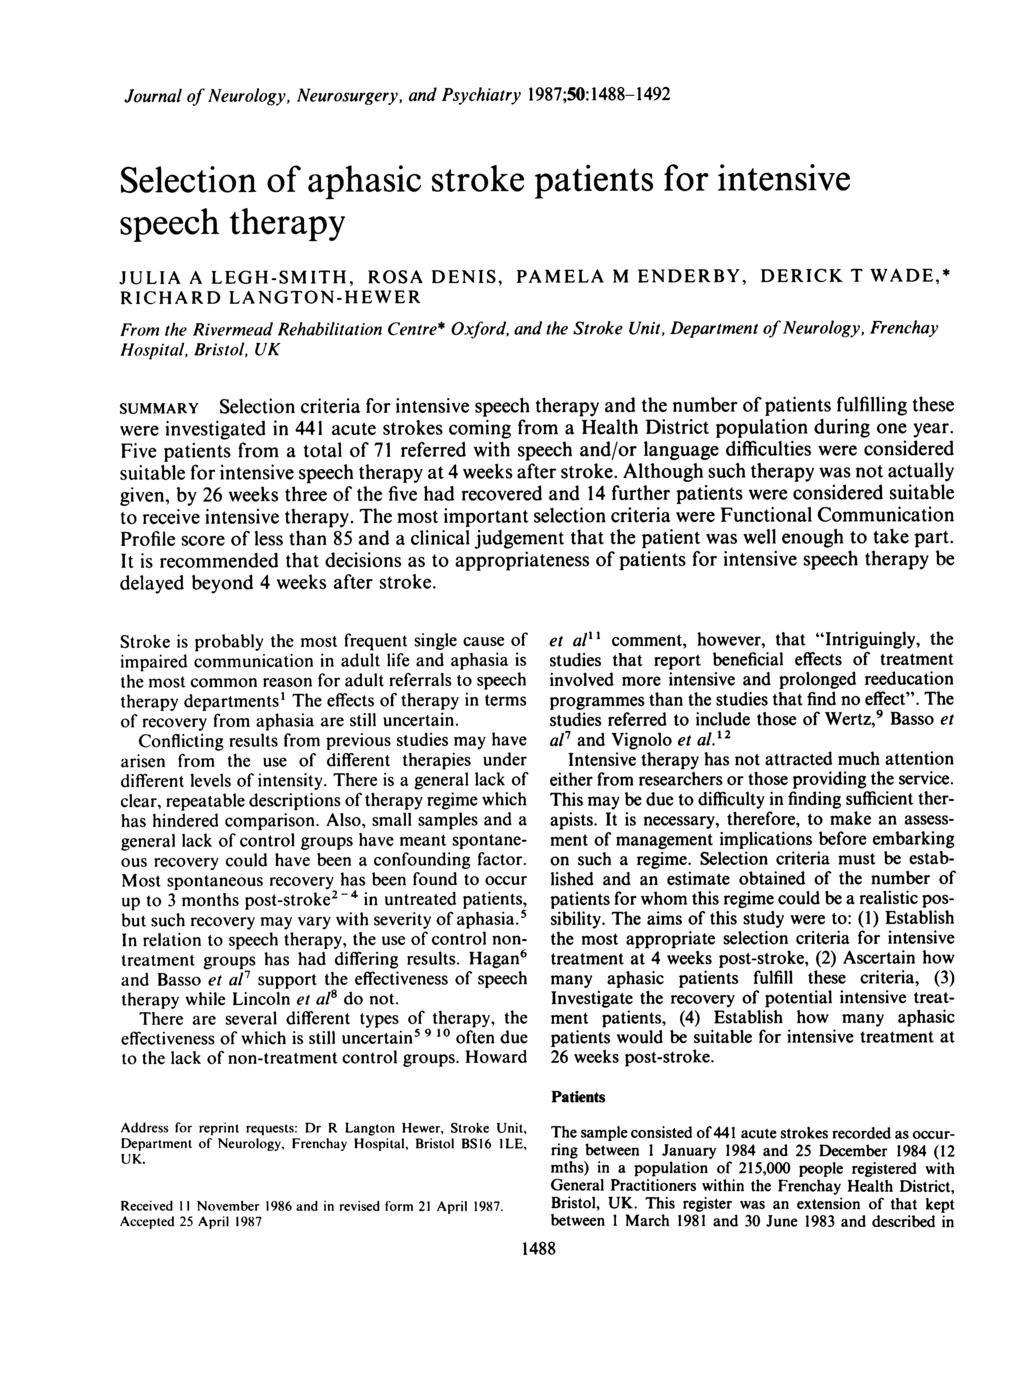 Journal of Neurology, Neurosurgery, and Psychiatry 1987;50:1488-1492 Selection of aphasic stroke patients for intensive speech therapy JULIA A LEGH-SMITH, ROSA DENIS, RICHARD LANGTON-HEWER PAMELA M